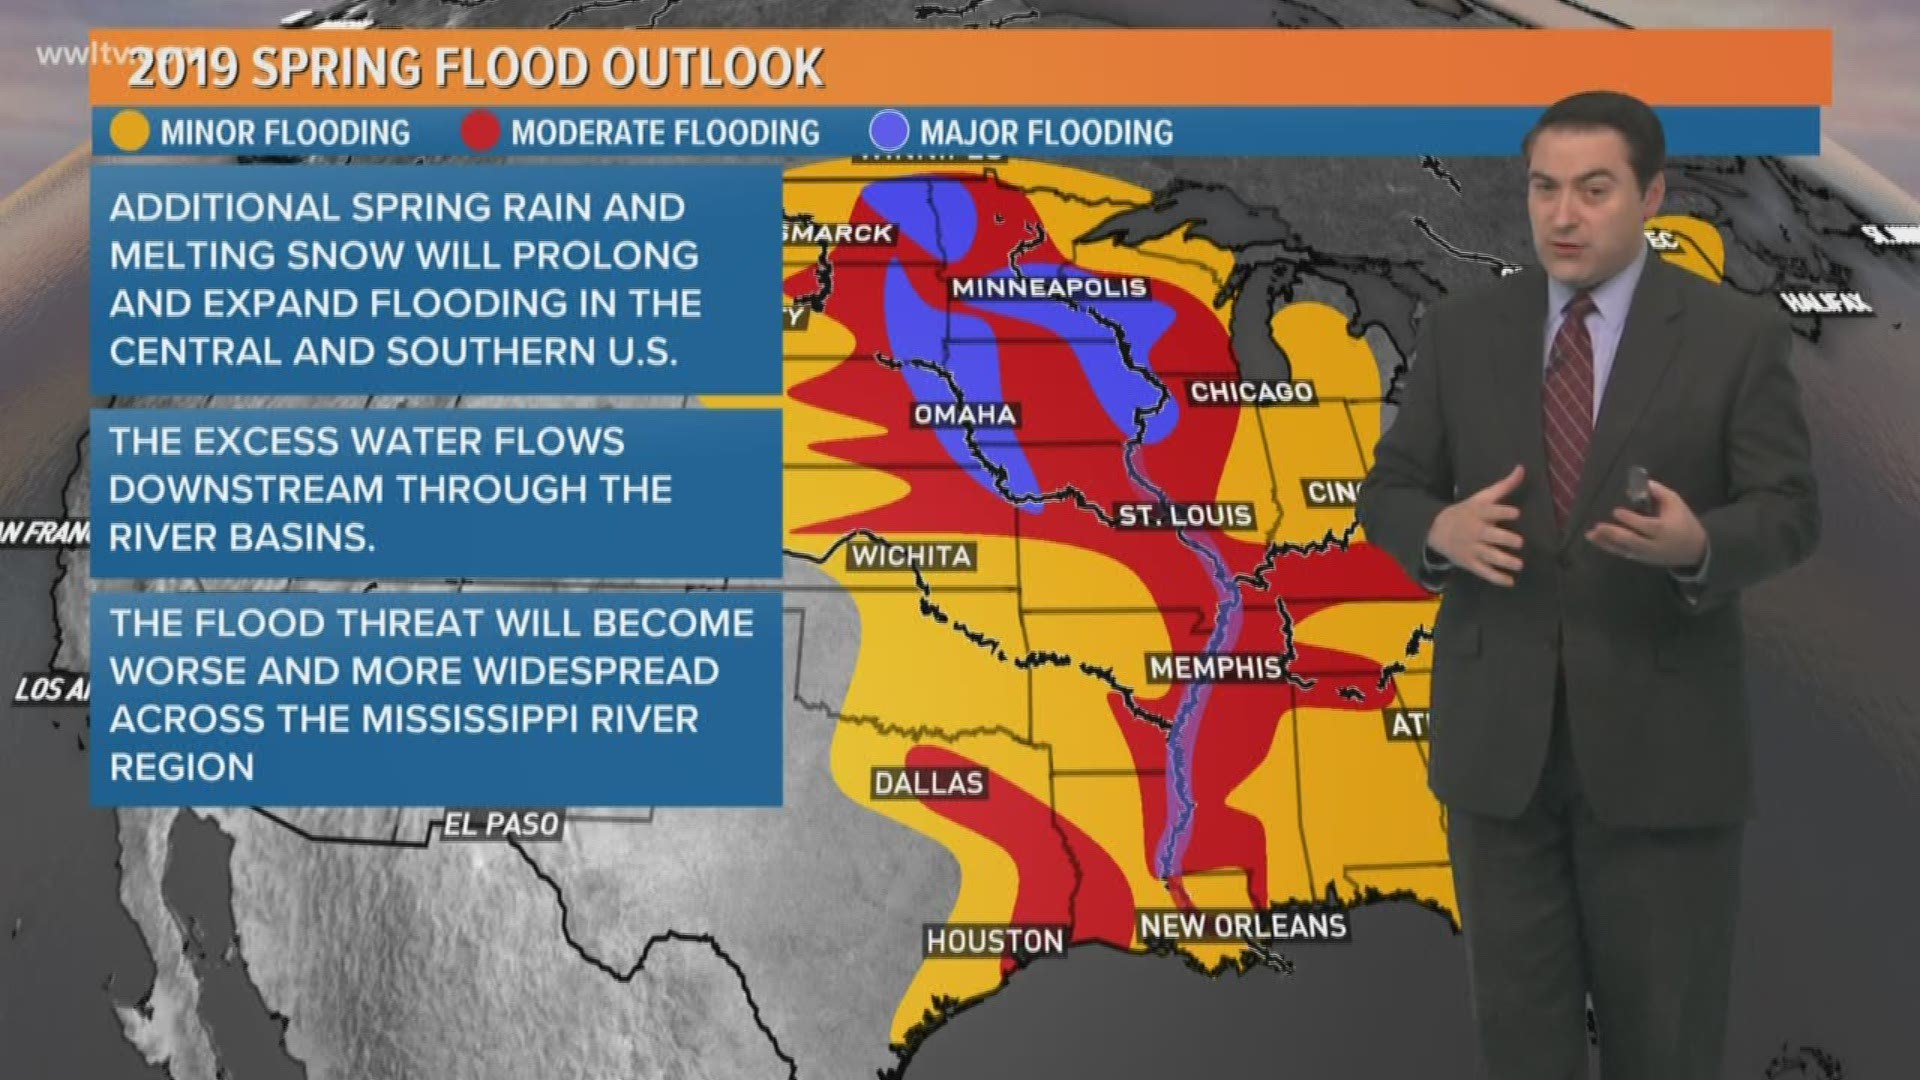 Meteorologist Dave Nussbaum has the latest spring flood outlook. Plus, more beautiful weather is expected through the weekend.